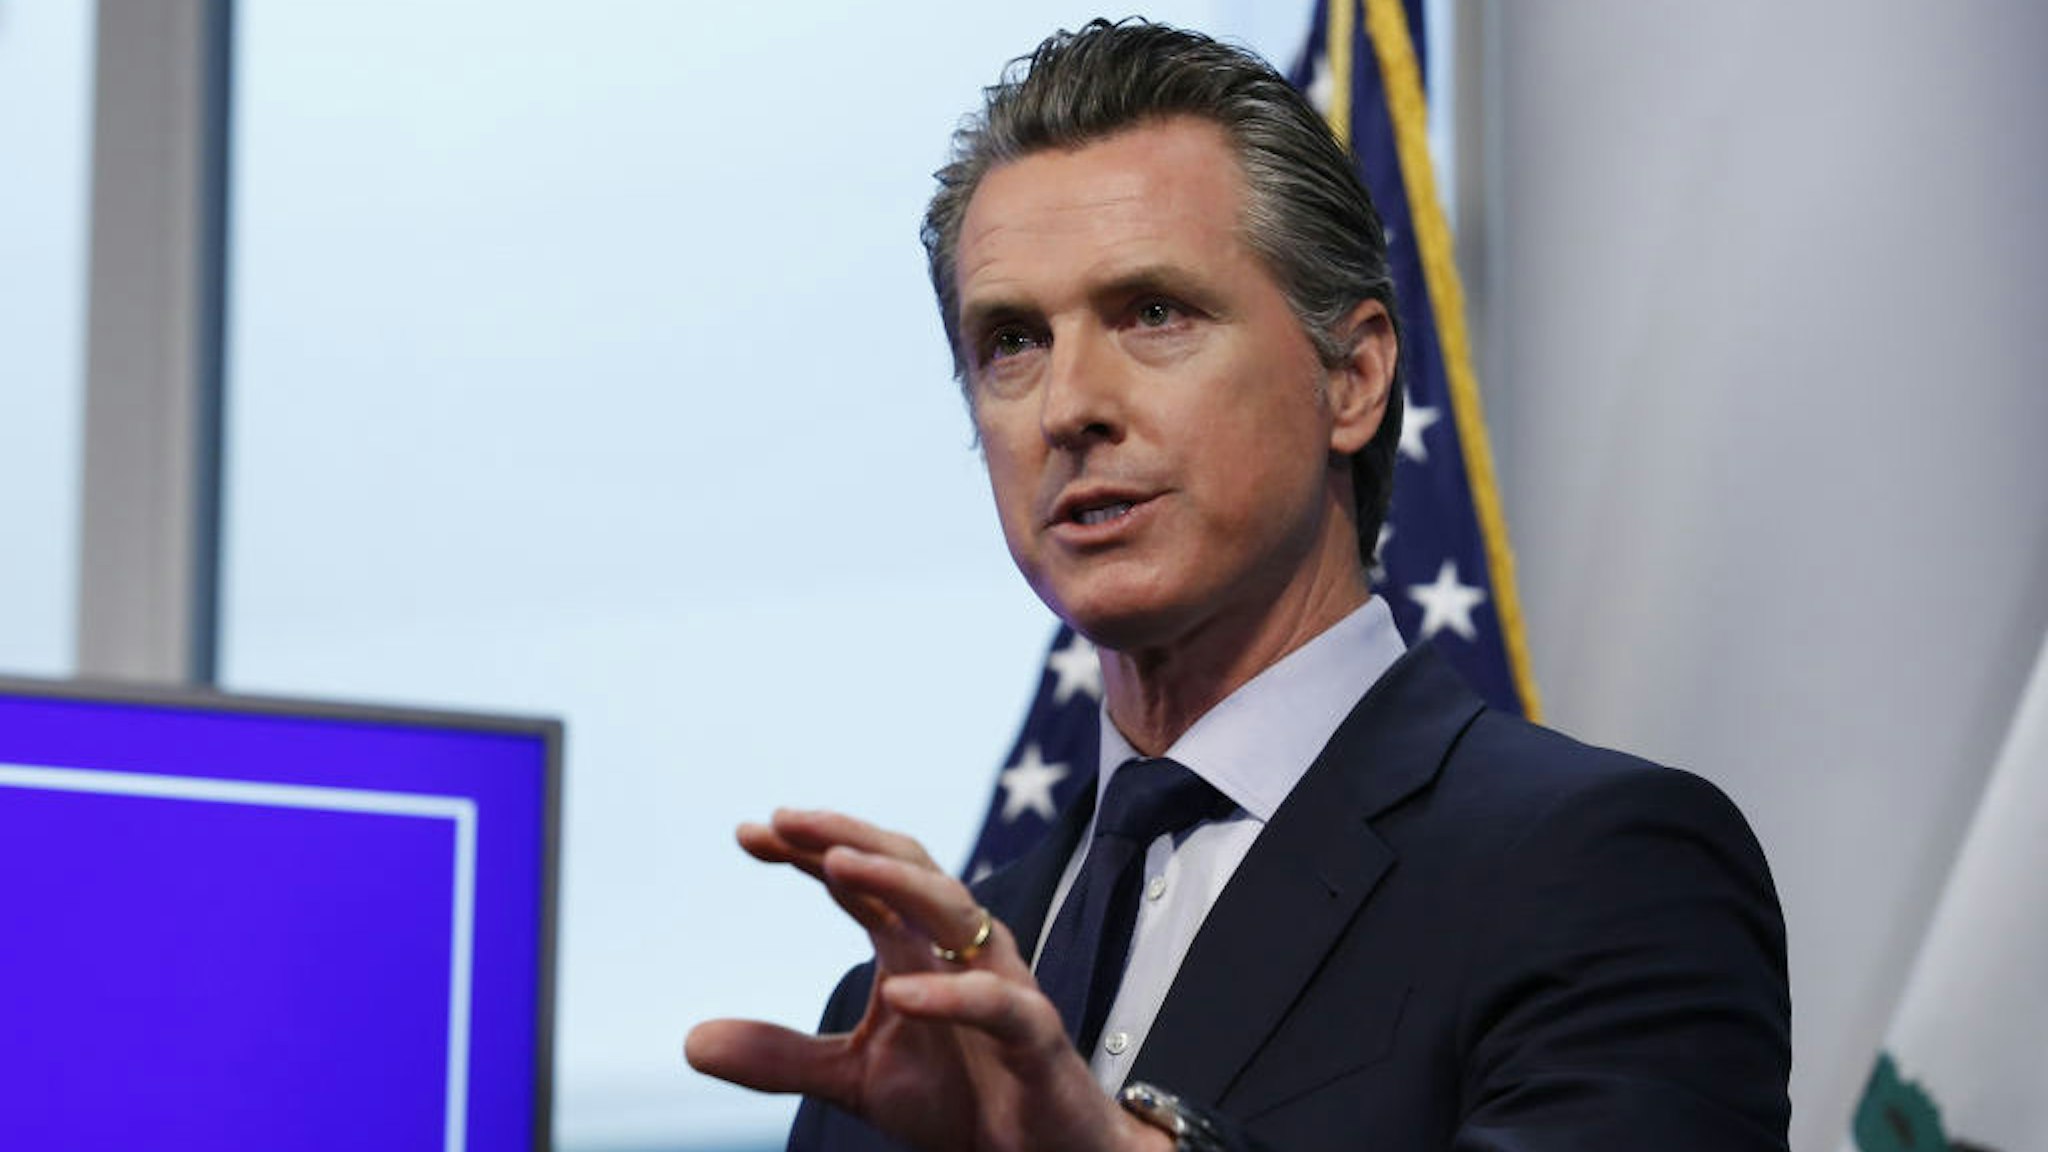 Gavin Newsom, governor of California, speaks during a news conference in Sacramento, California, U.S., on Tuesday, April 14, 2020. Newsom outlined his plan to lift restrictions in the most-populous U.S. state, saying a reopening depends on meeting a series of benchmarks that would remake daily life for 40 million residents. Photographer: Rich Pedroncelli/AP/Bloomberg